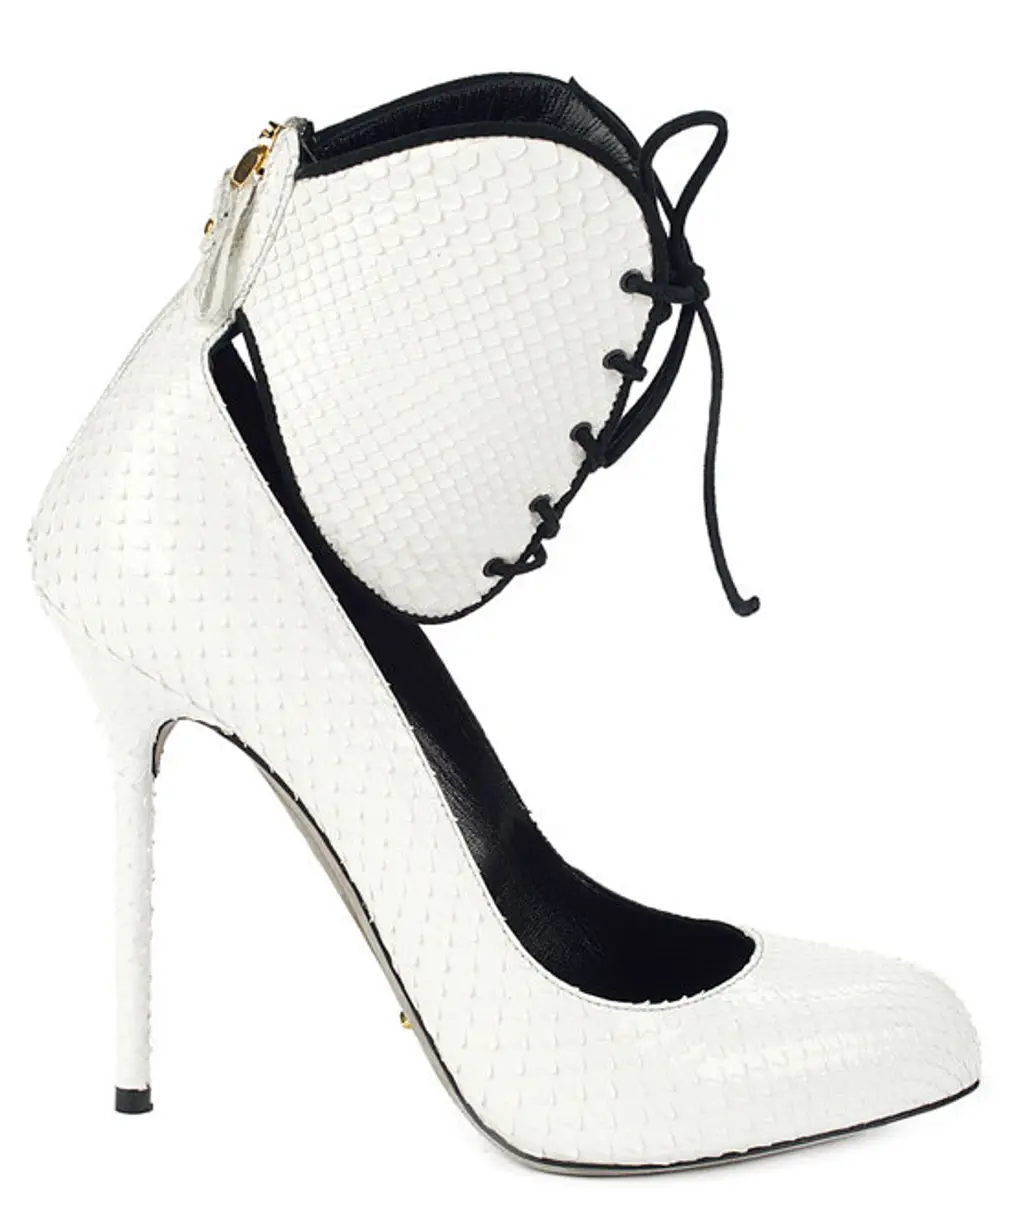 Classic White Pump with a Twist